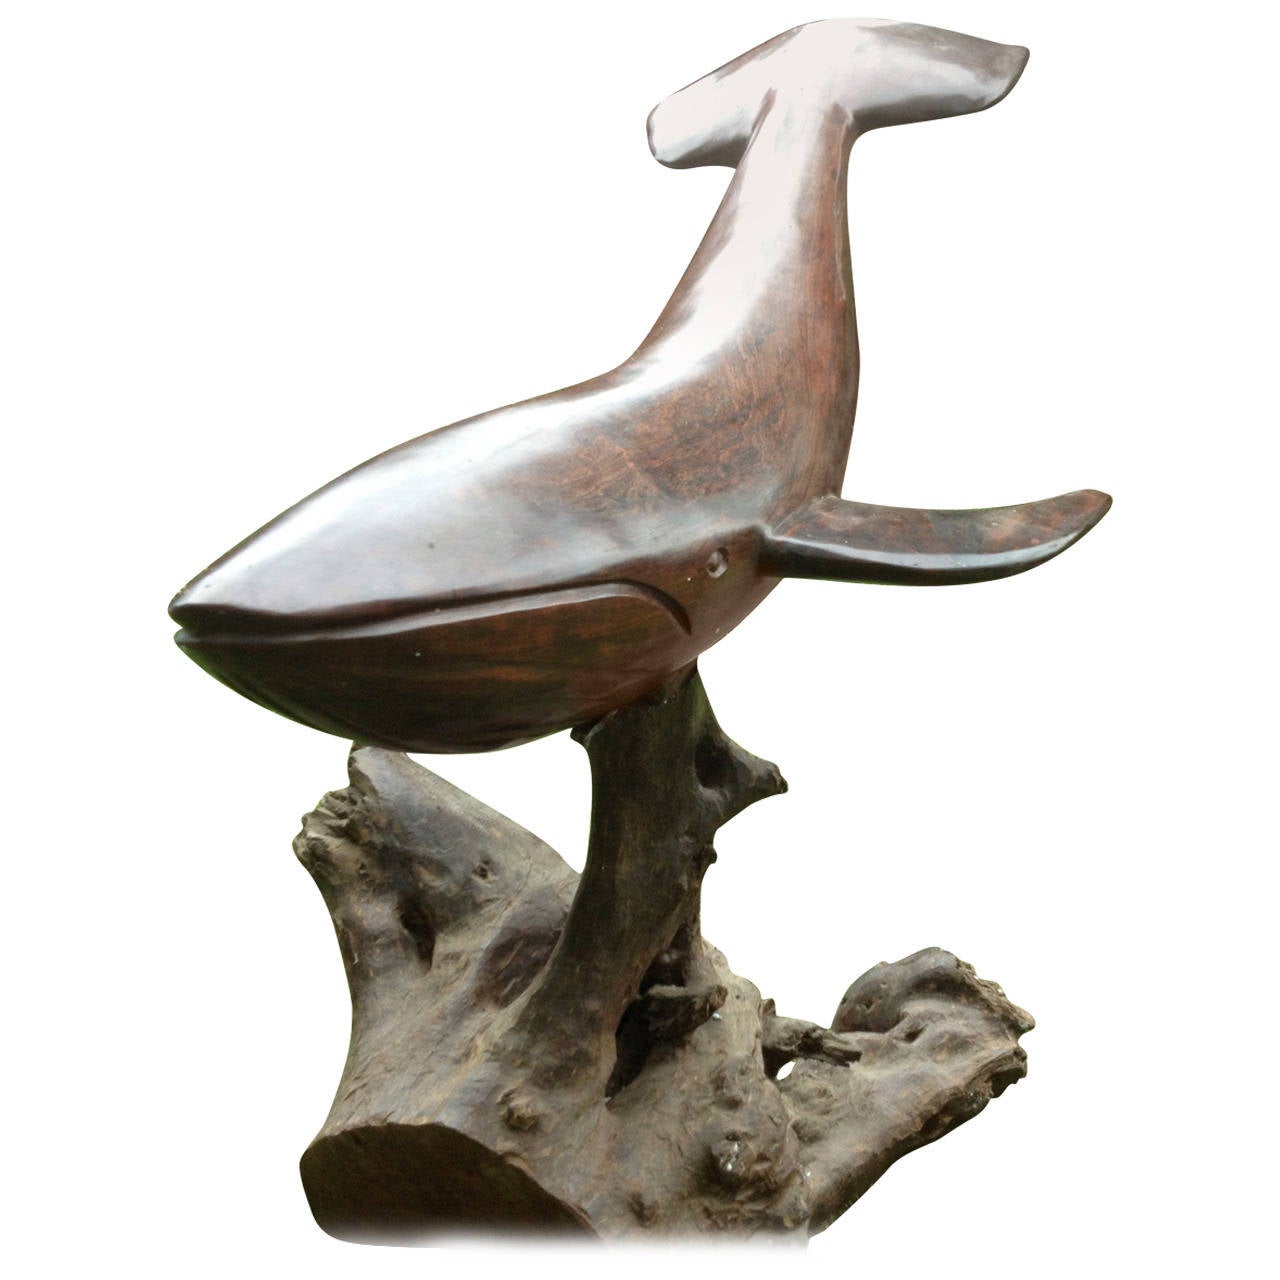 America’s, a monumental carved wooden whale, early to mid-20th century.
The large simply carved mammal fashioned from a heavy, dense ironwood and sitting atop a separate natural root wood base, both with patina from appropriate age. Total